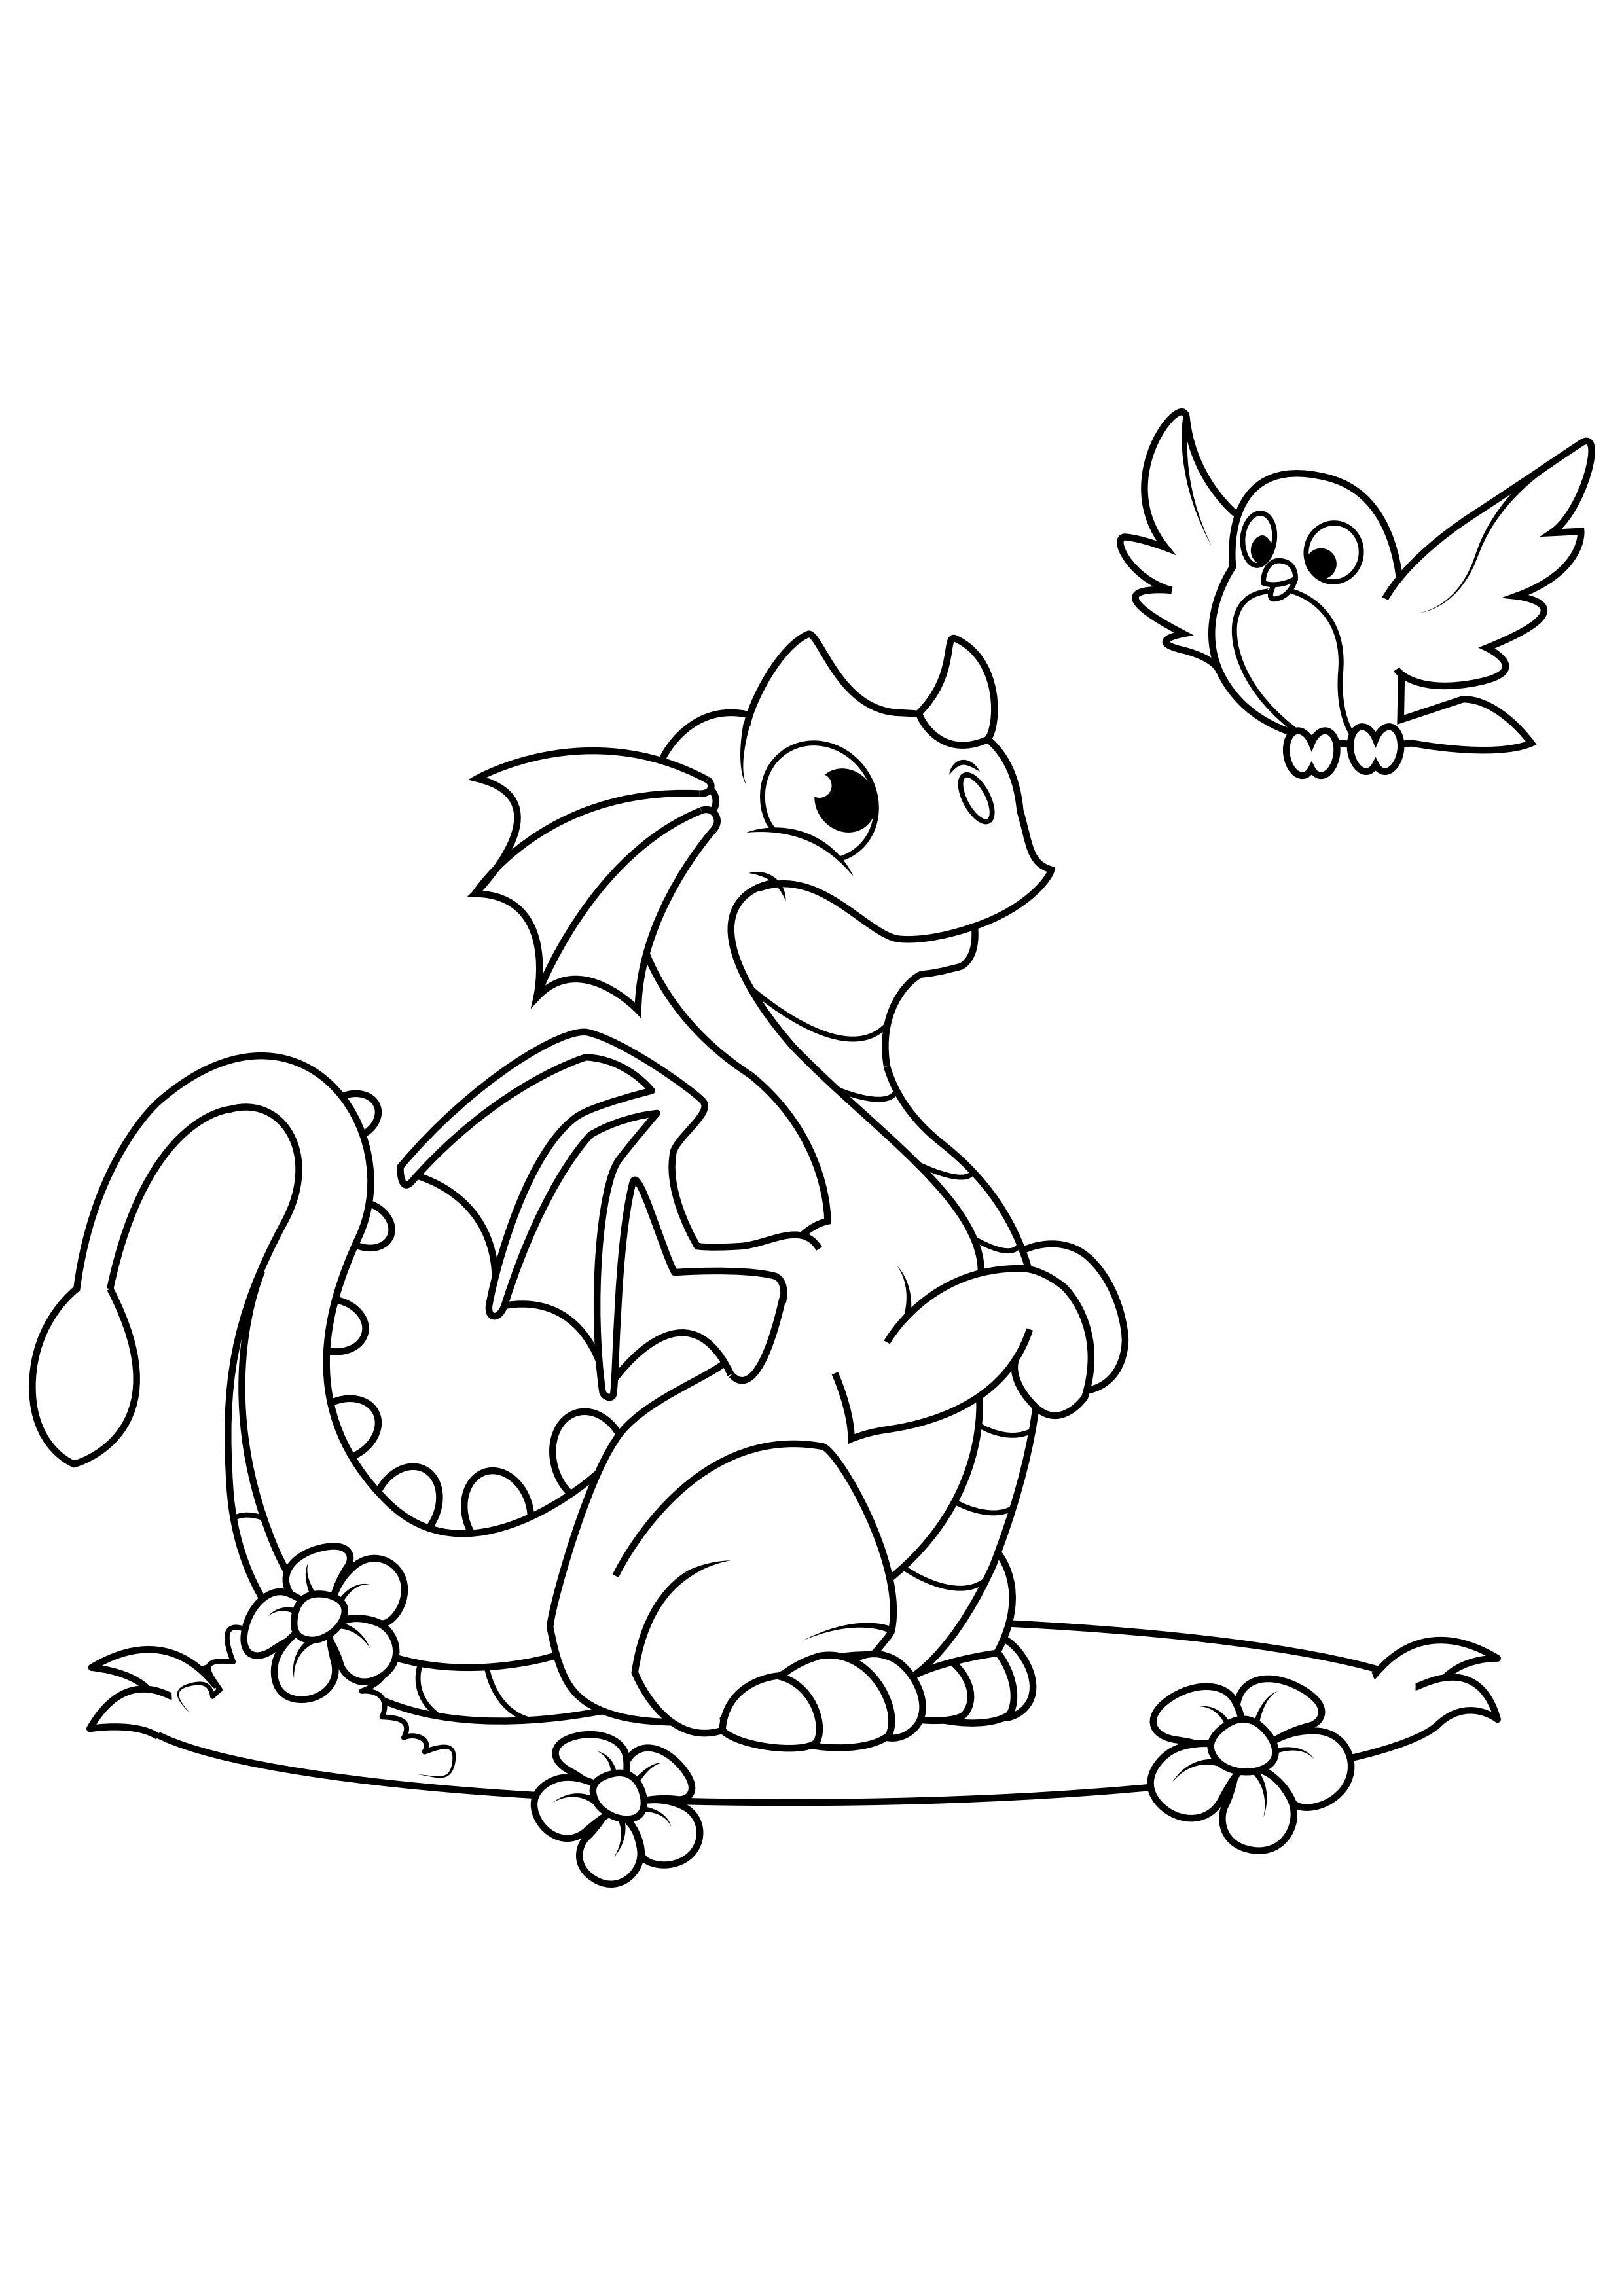 Coloring Page dragon with bird   free printable coloring pages ...